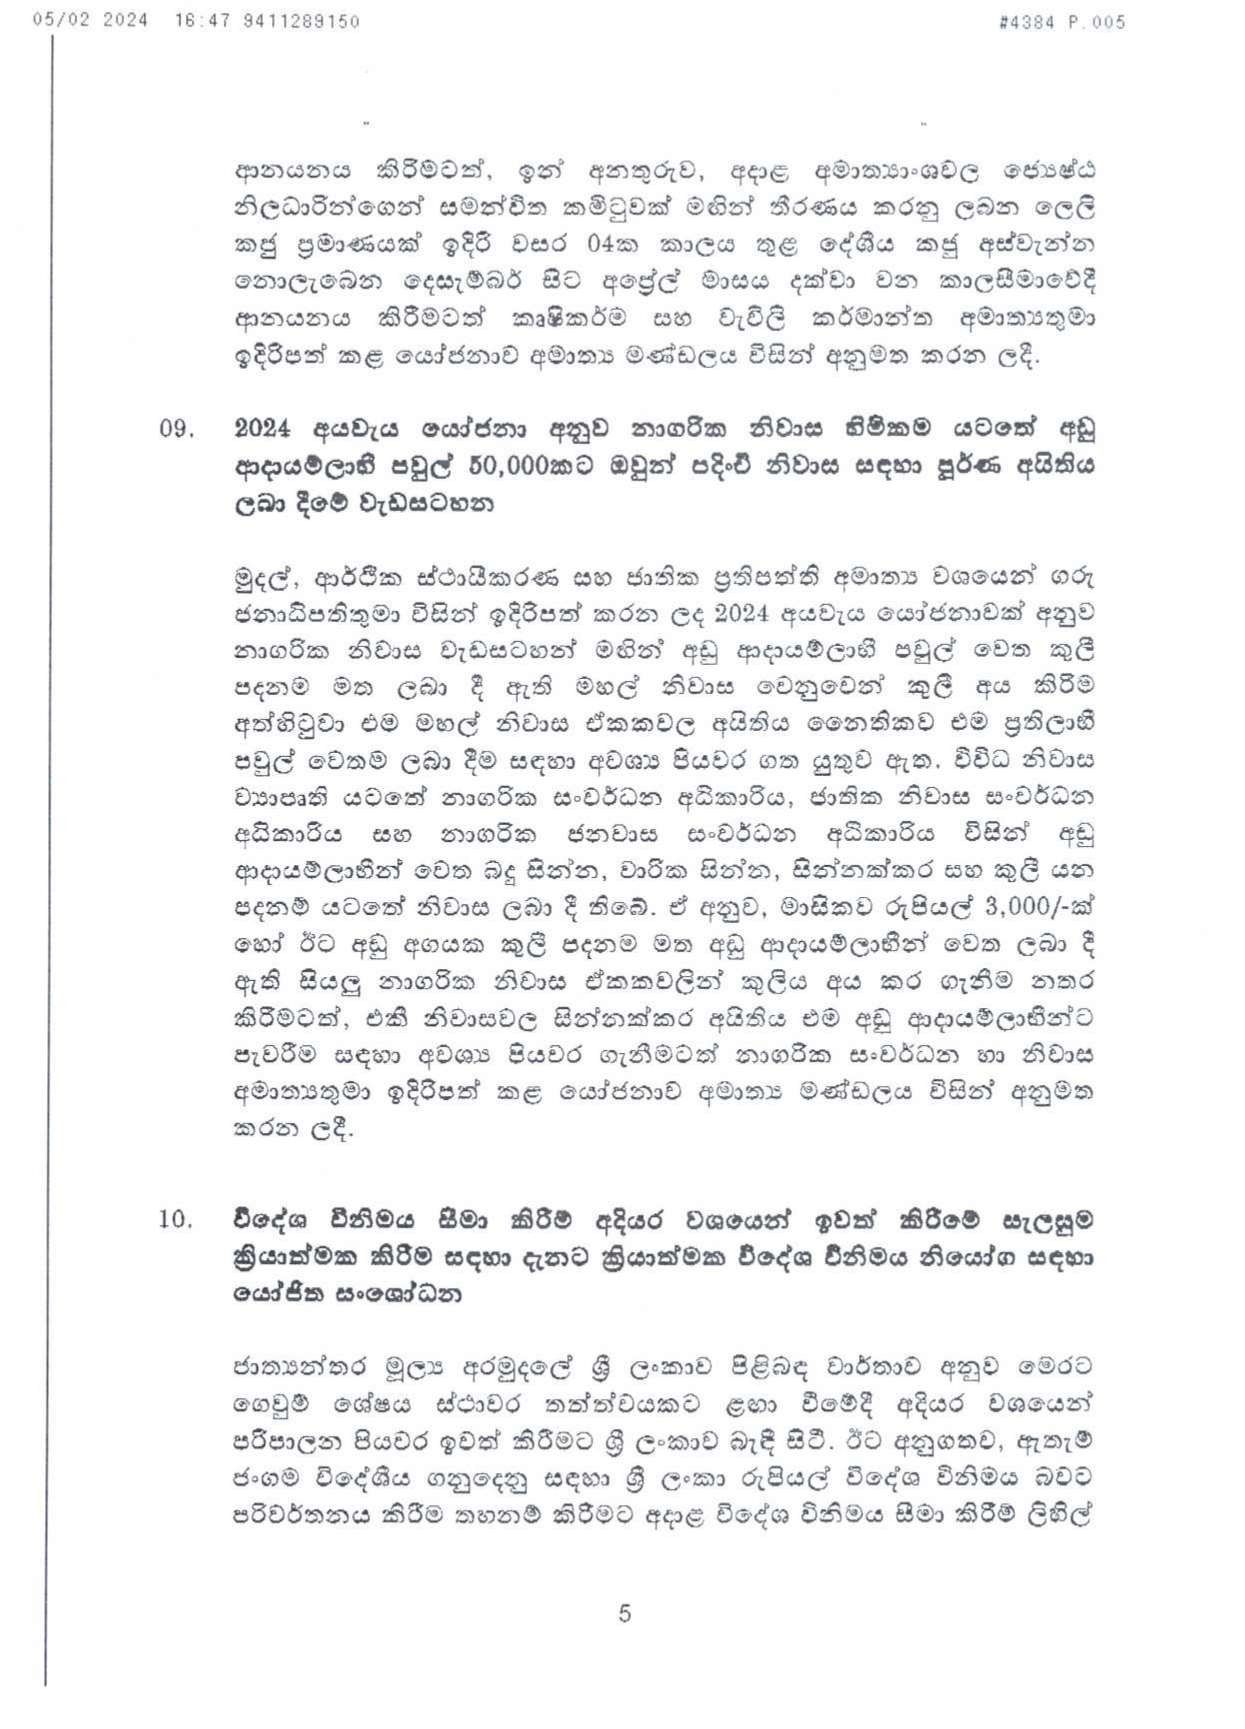 Cabinet Decision on 05.02.2024 page 0005